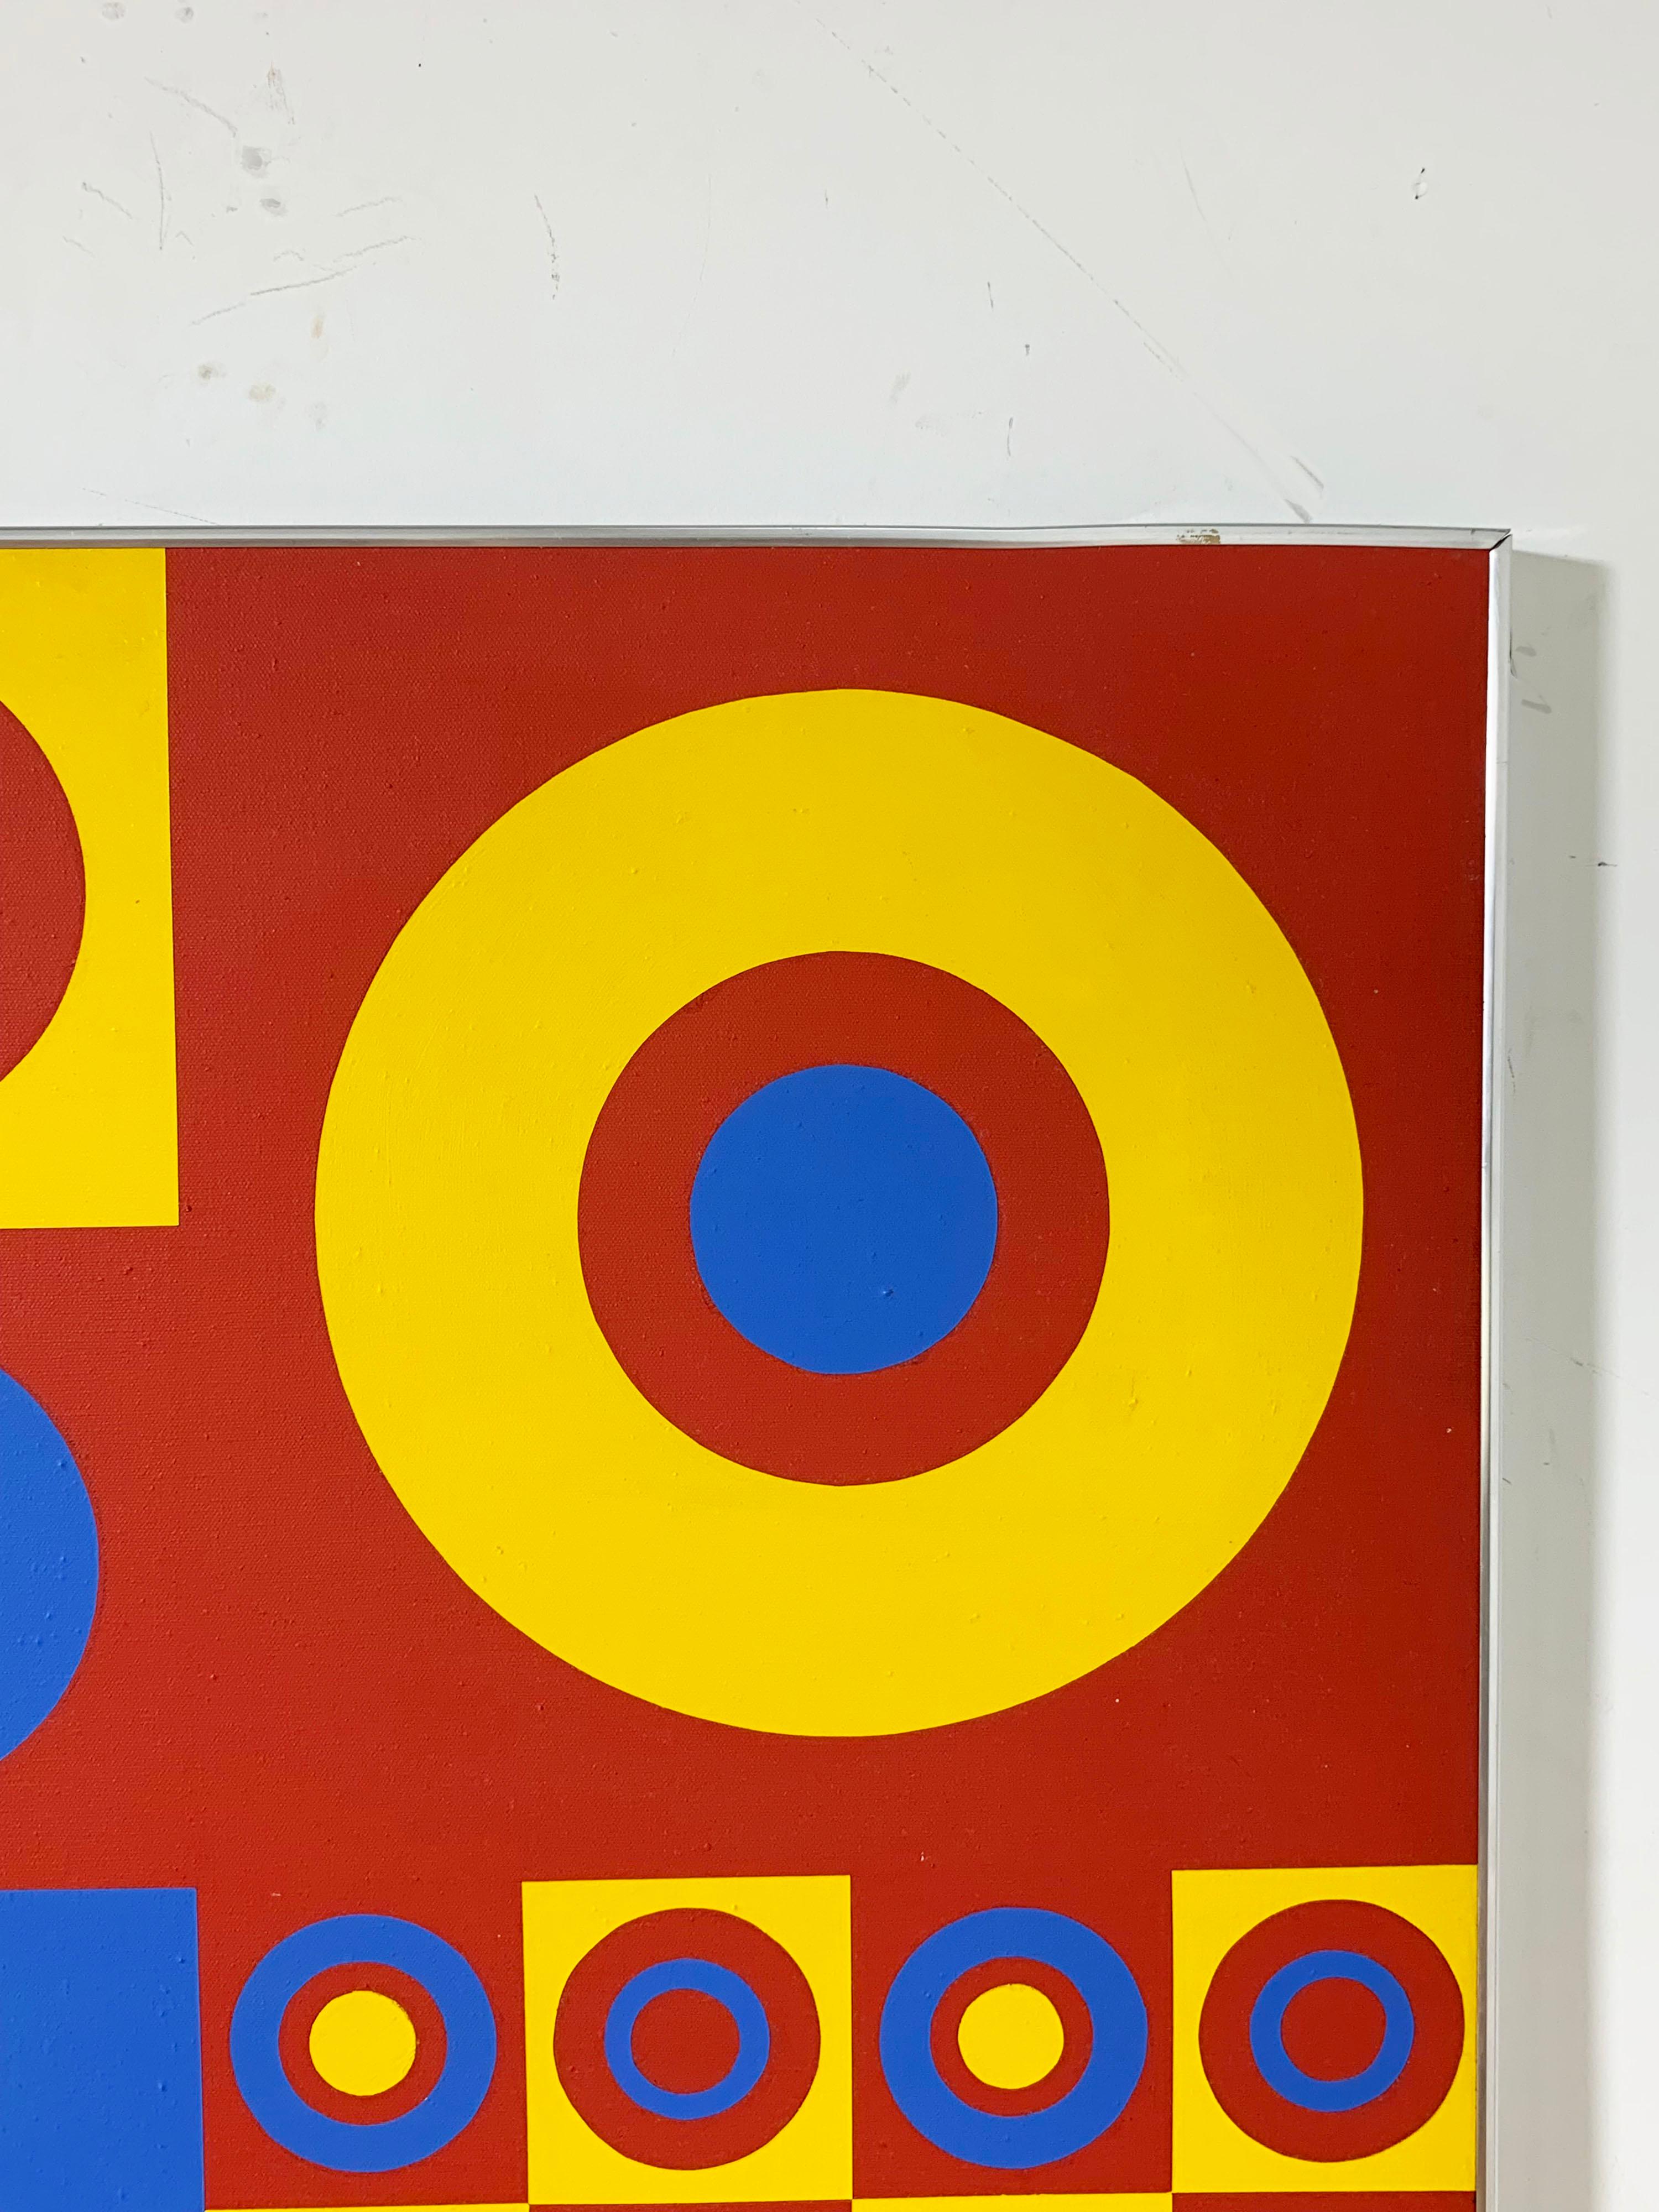 American Hard Edge Op Art Painting by Wilma Dick, Circa 1970s For Sale